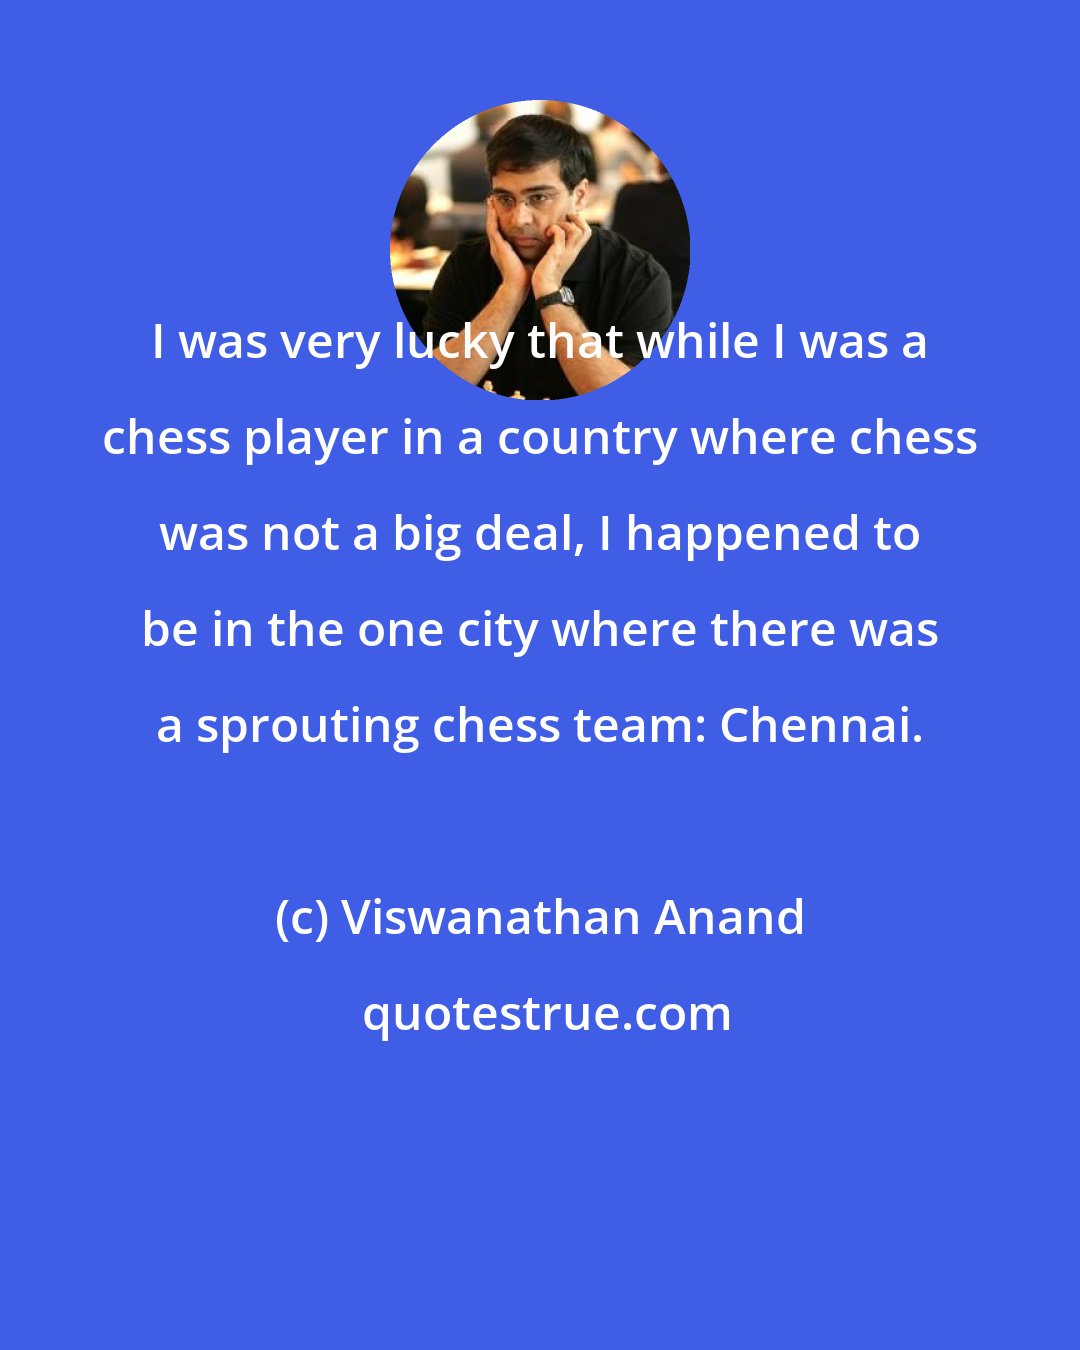 Viswanathan Anand: I was very lucky that while I was a chess player in a country where chess was not a big deal, I happened to be in the one city where there was a sprouting chess team: Chennai.